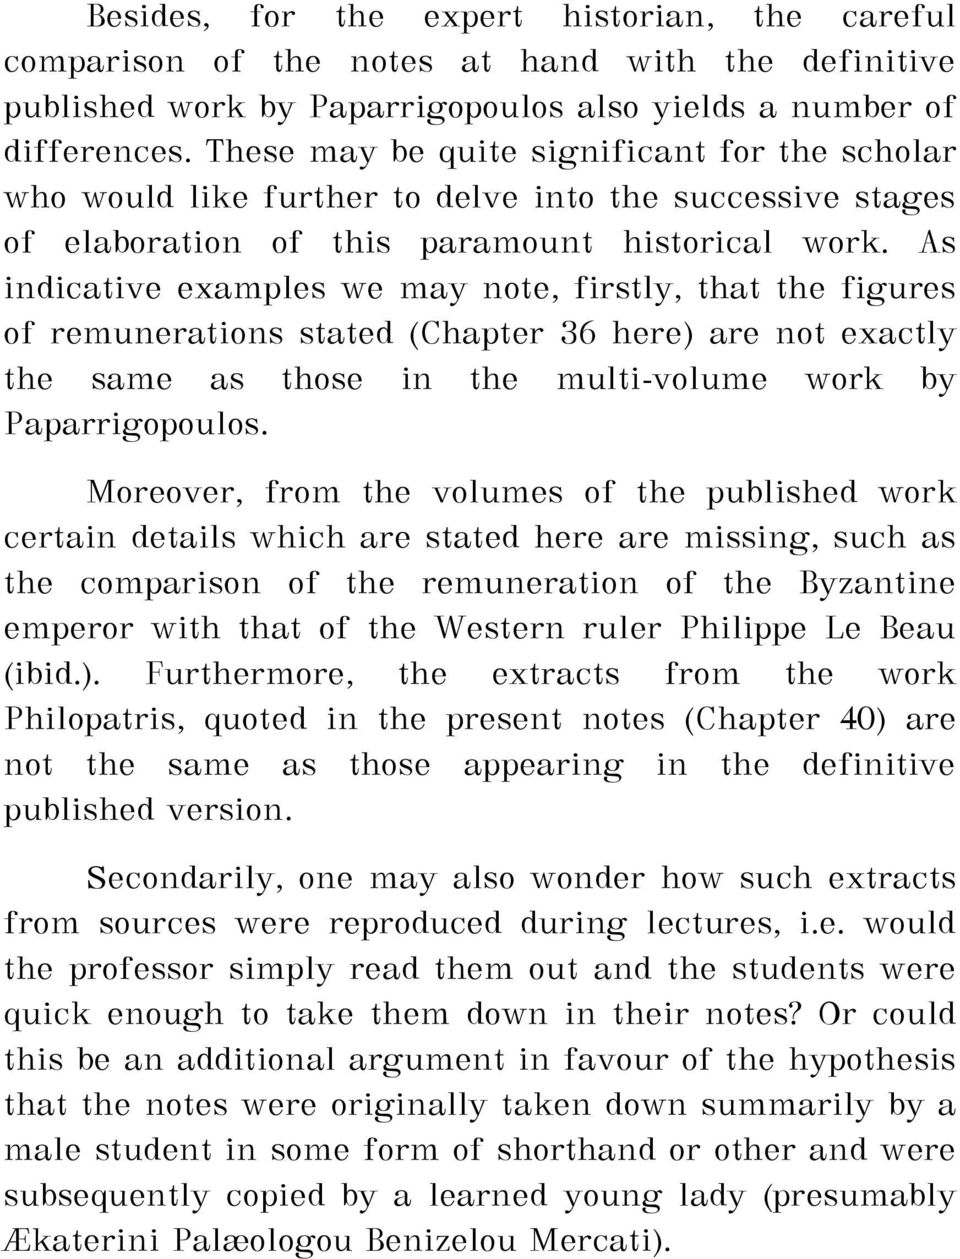 As indicative examples we may note, firstly, that the figures of remunerations stated (Chapter 36 here) are not exactly the same as those in the multi-volume work by Paparrigopoulos.